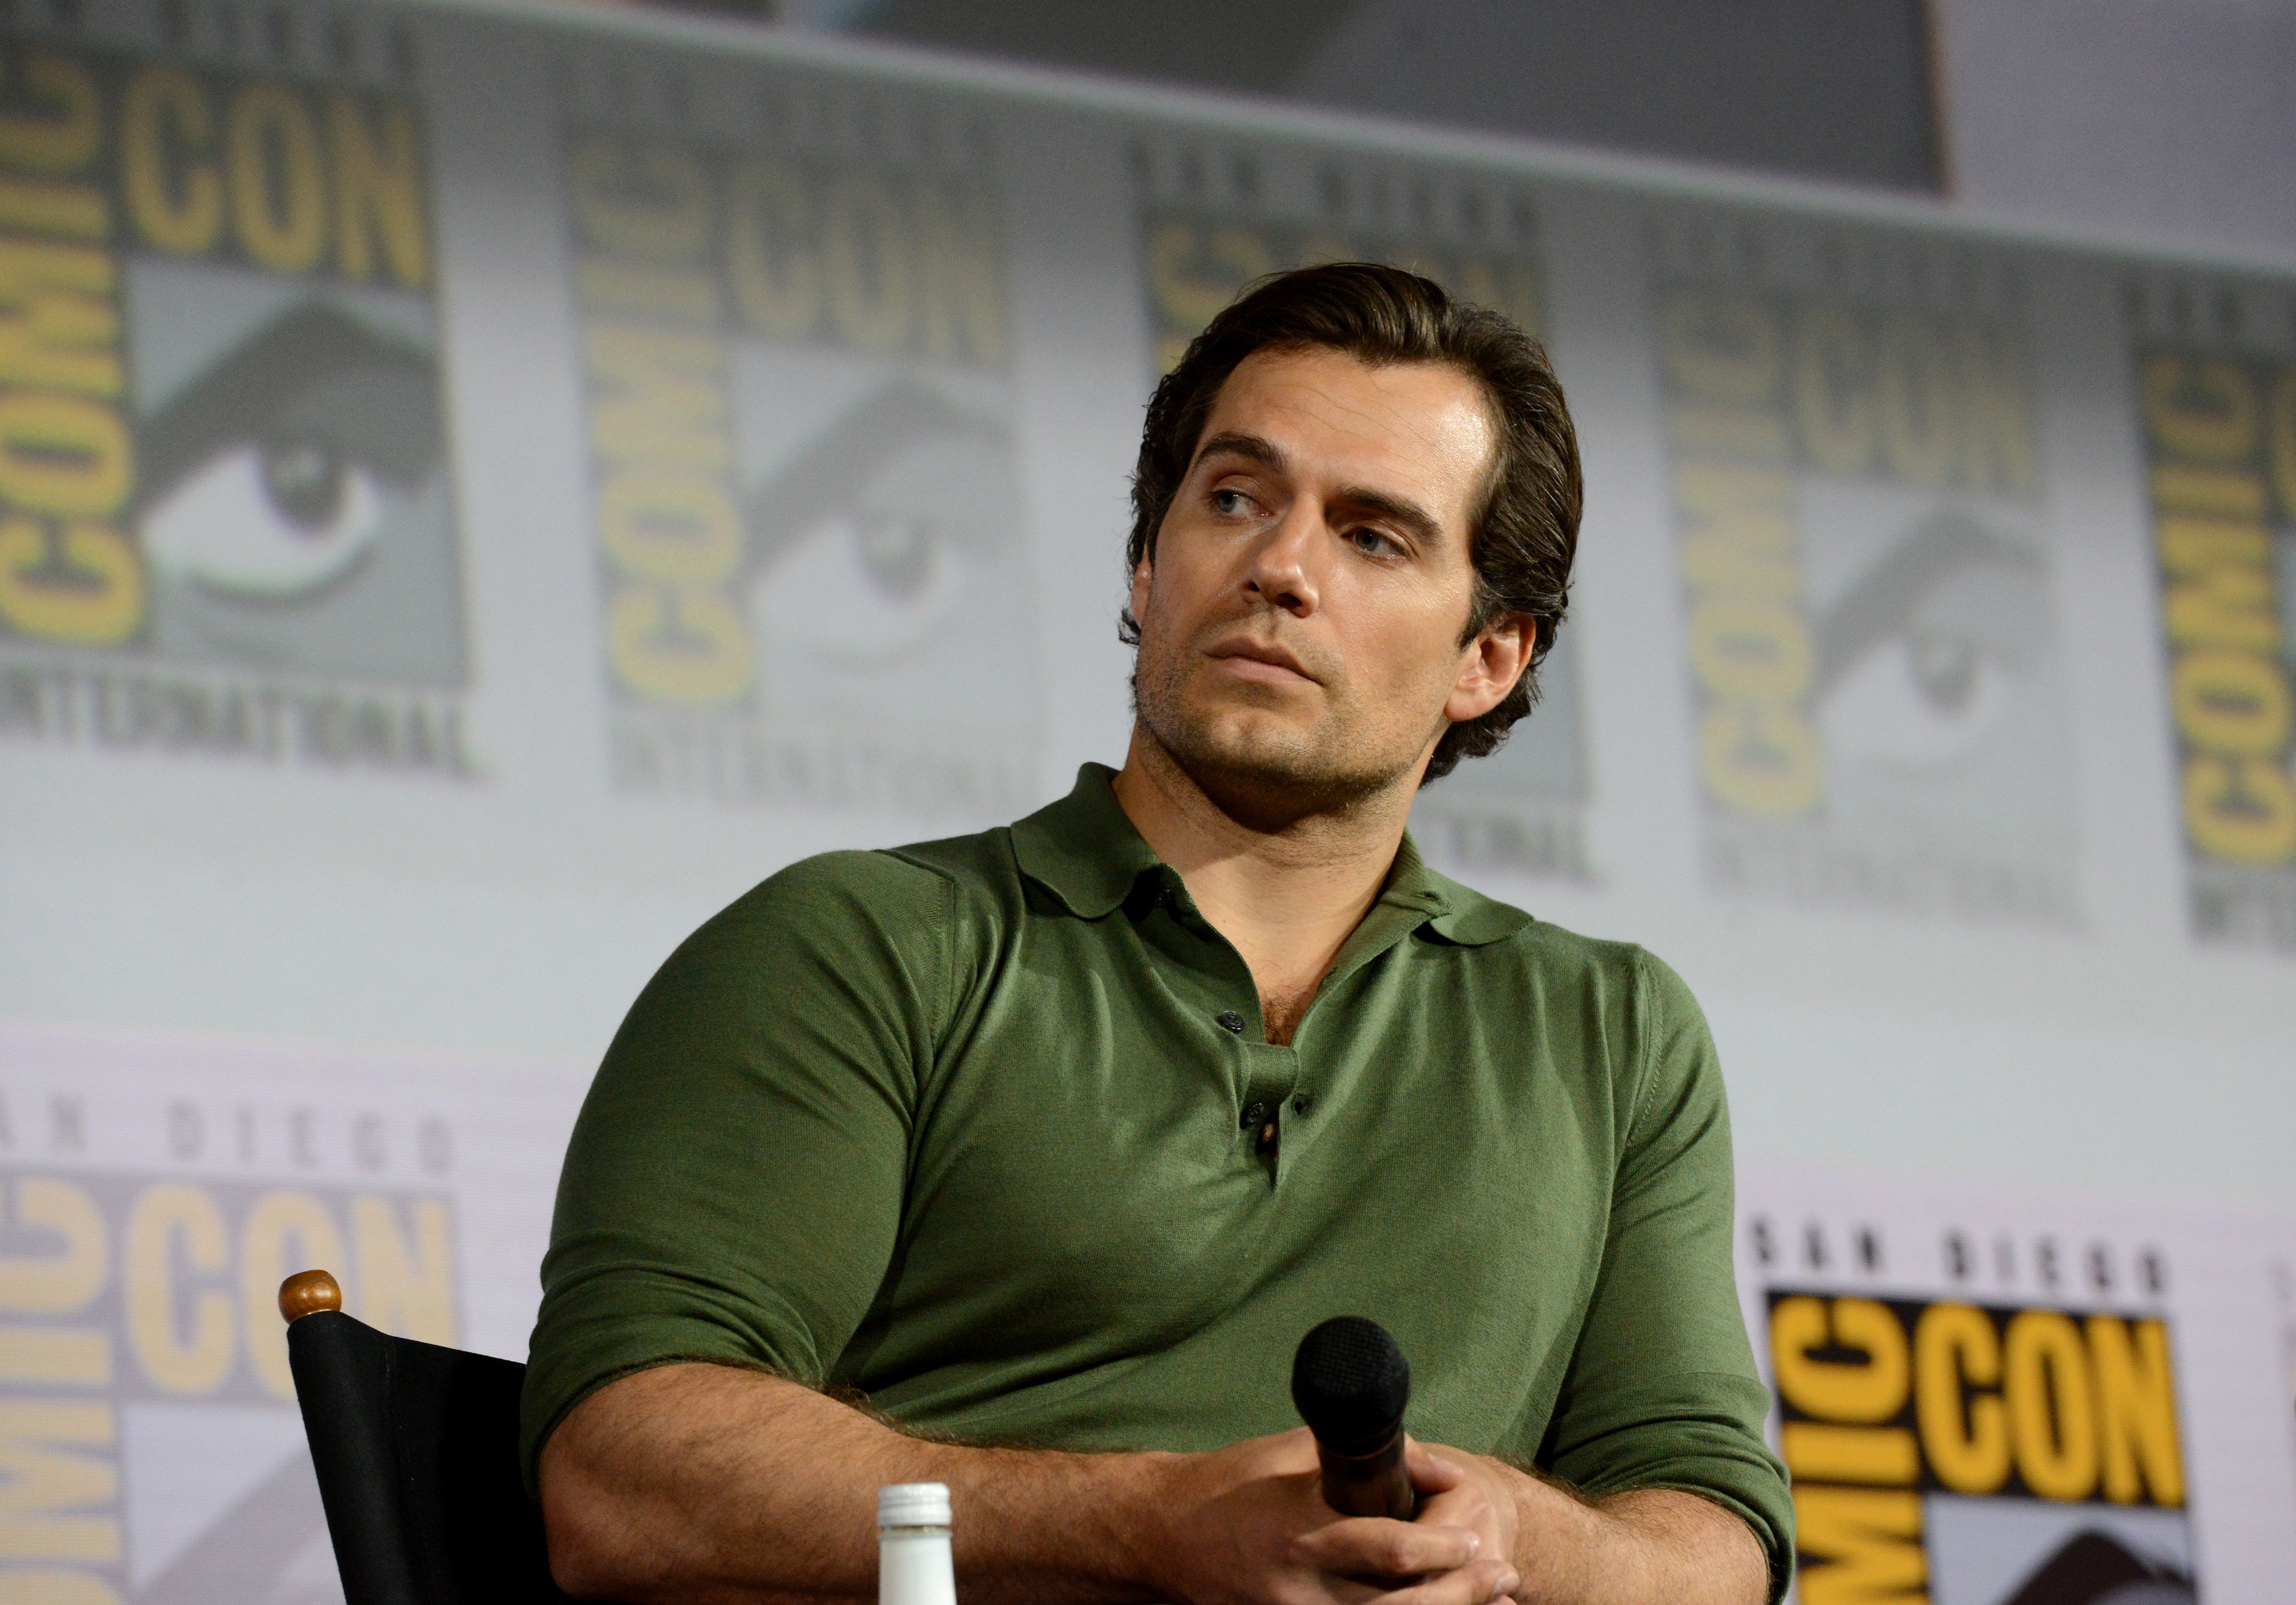  Henry Cavill at the 2019 Comic-Con International on July 19, 2019, in San Diego, California. | Source: Getty Images